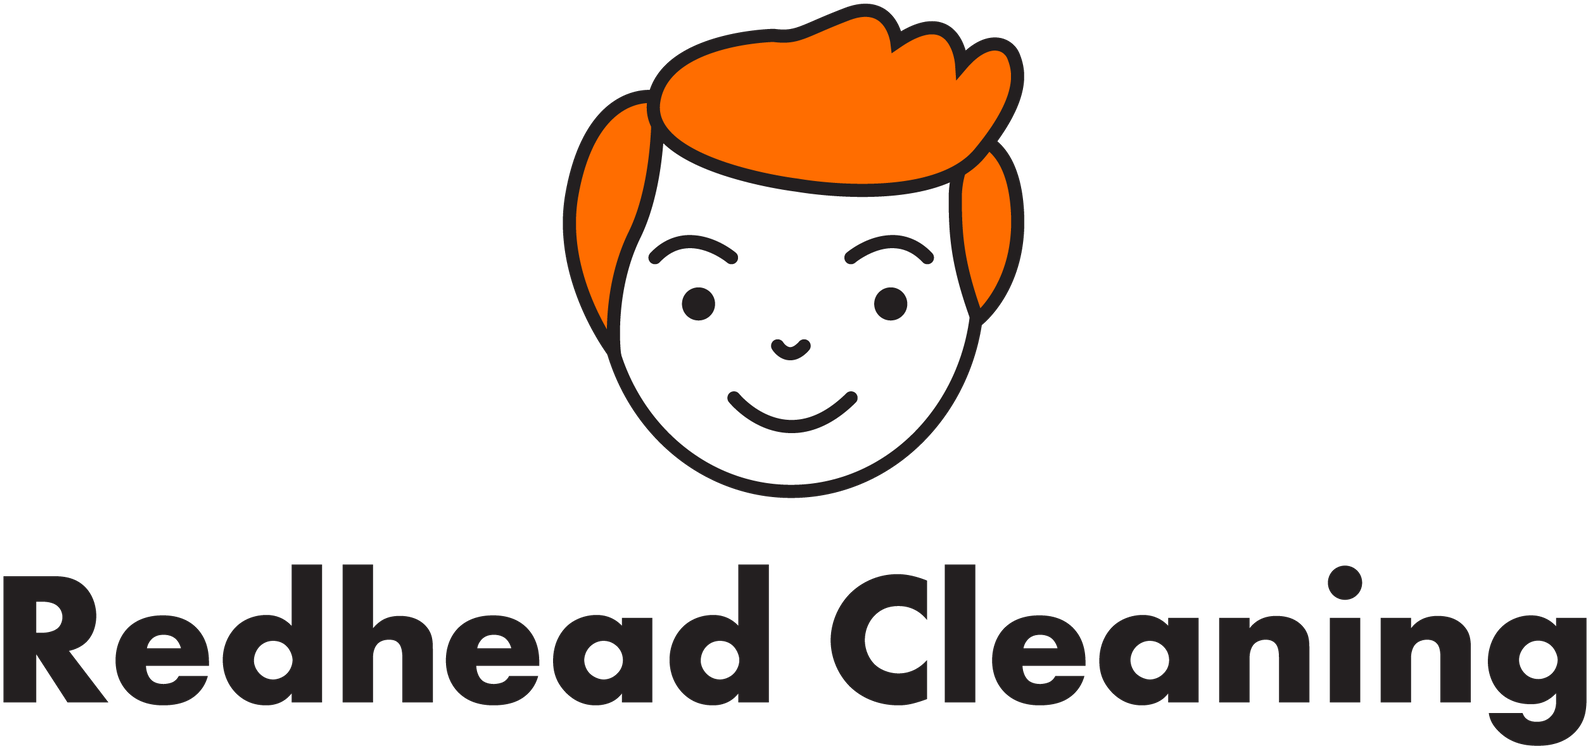 Redhead Cleaning Logo PNG image